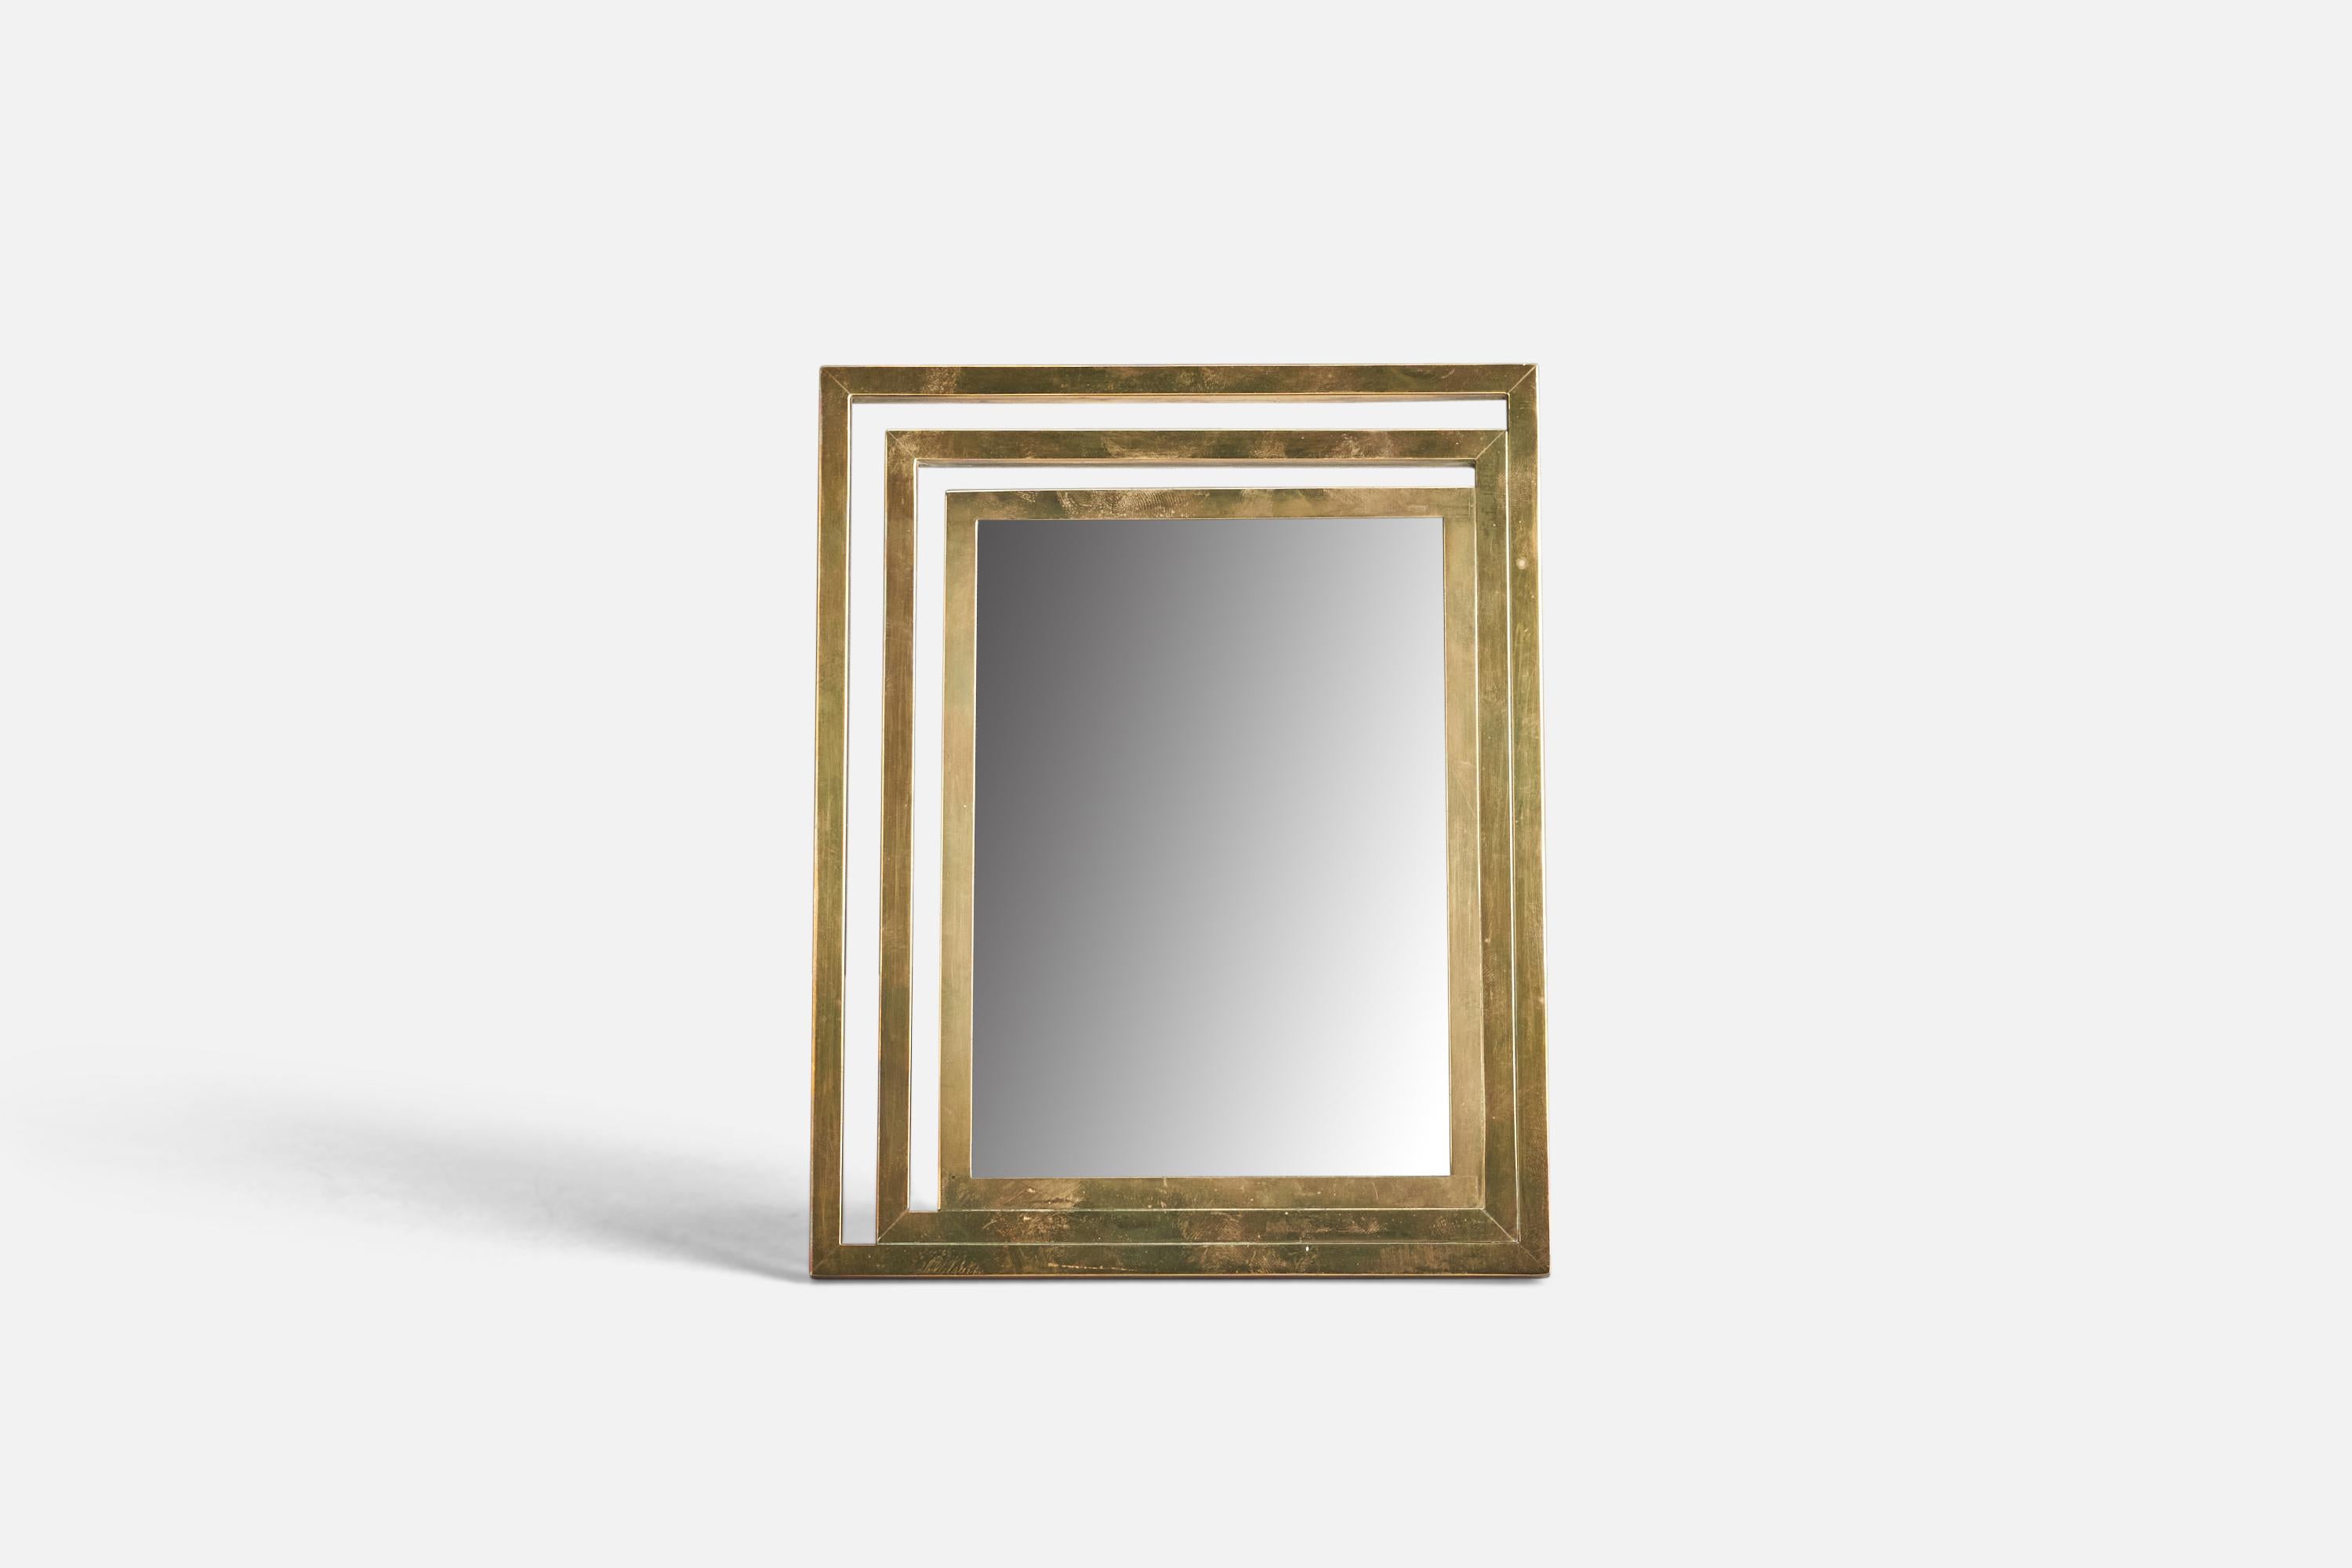 A brass table mirror designed and produced by an Italian Designer, Italy, 1970s.